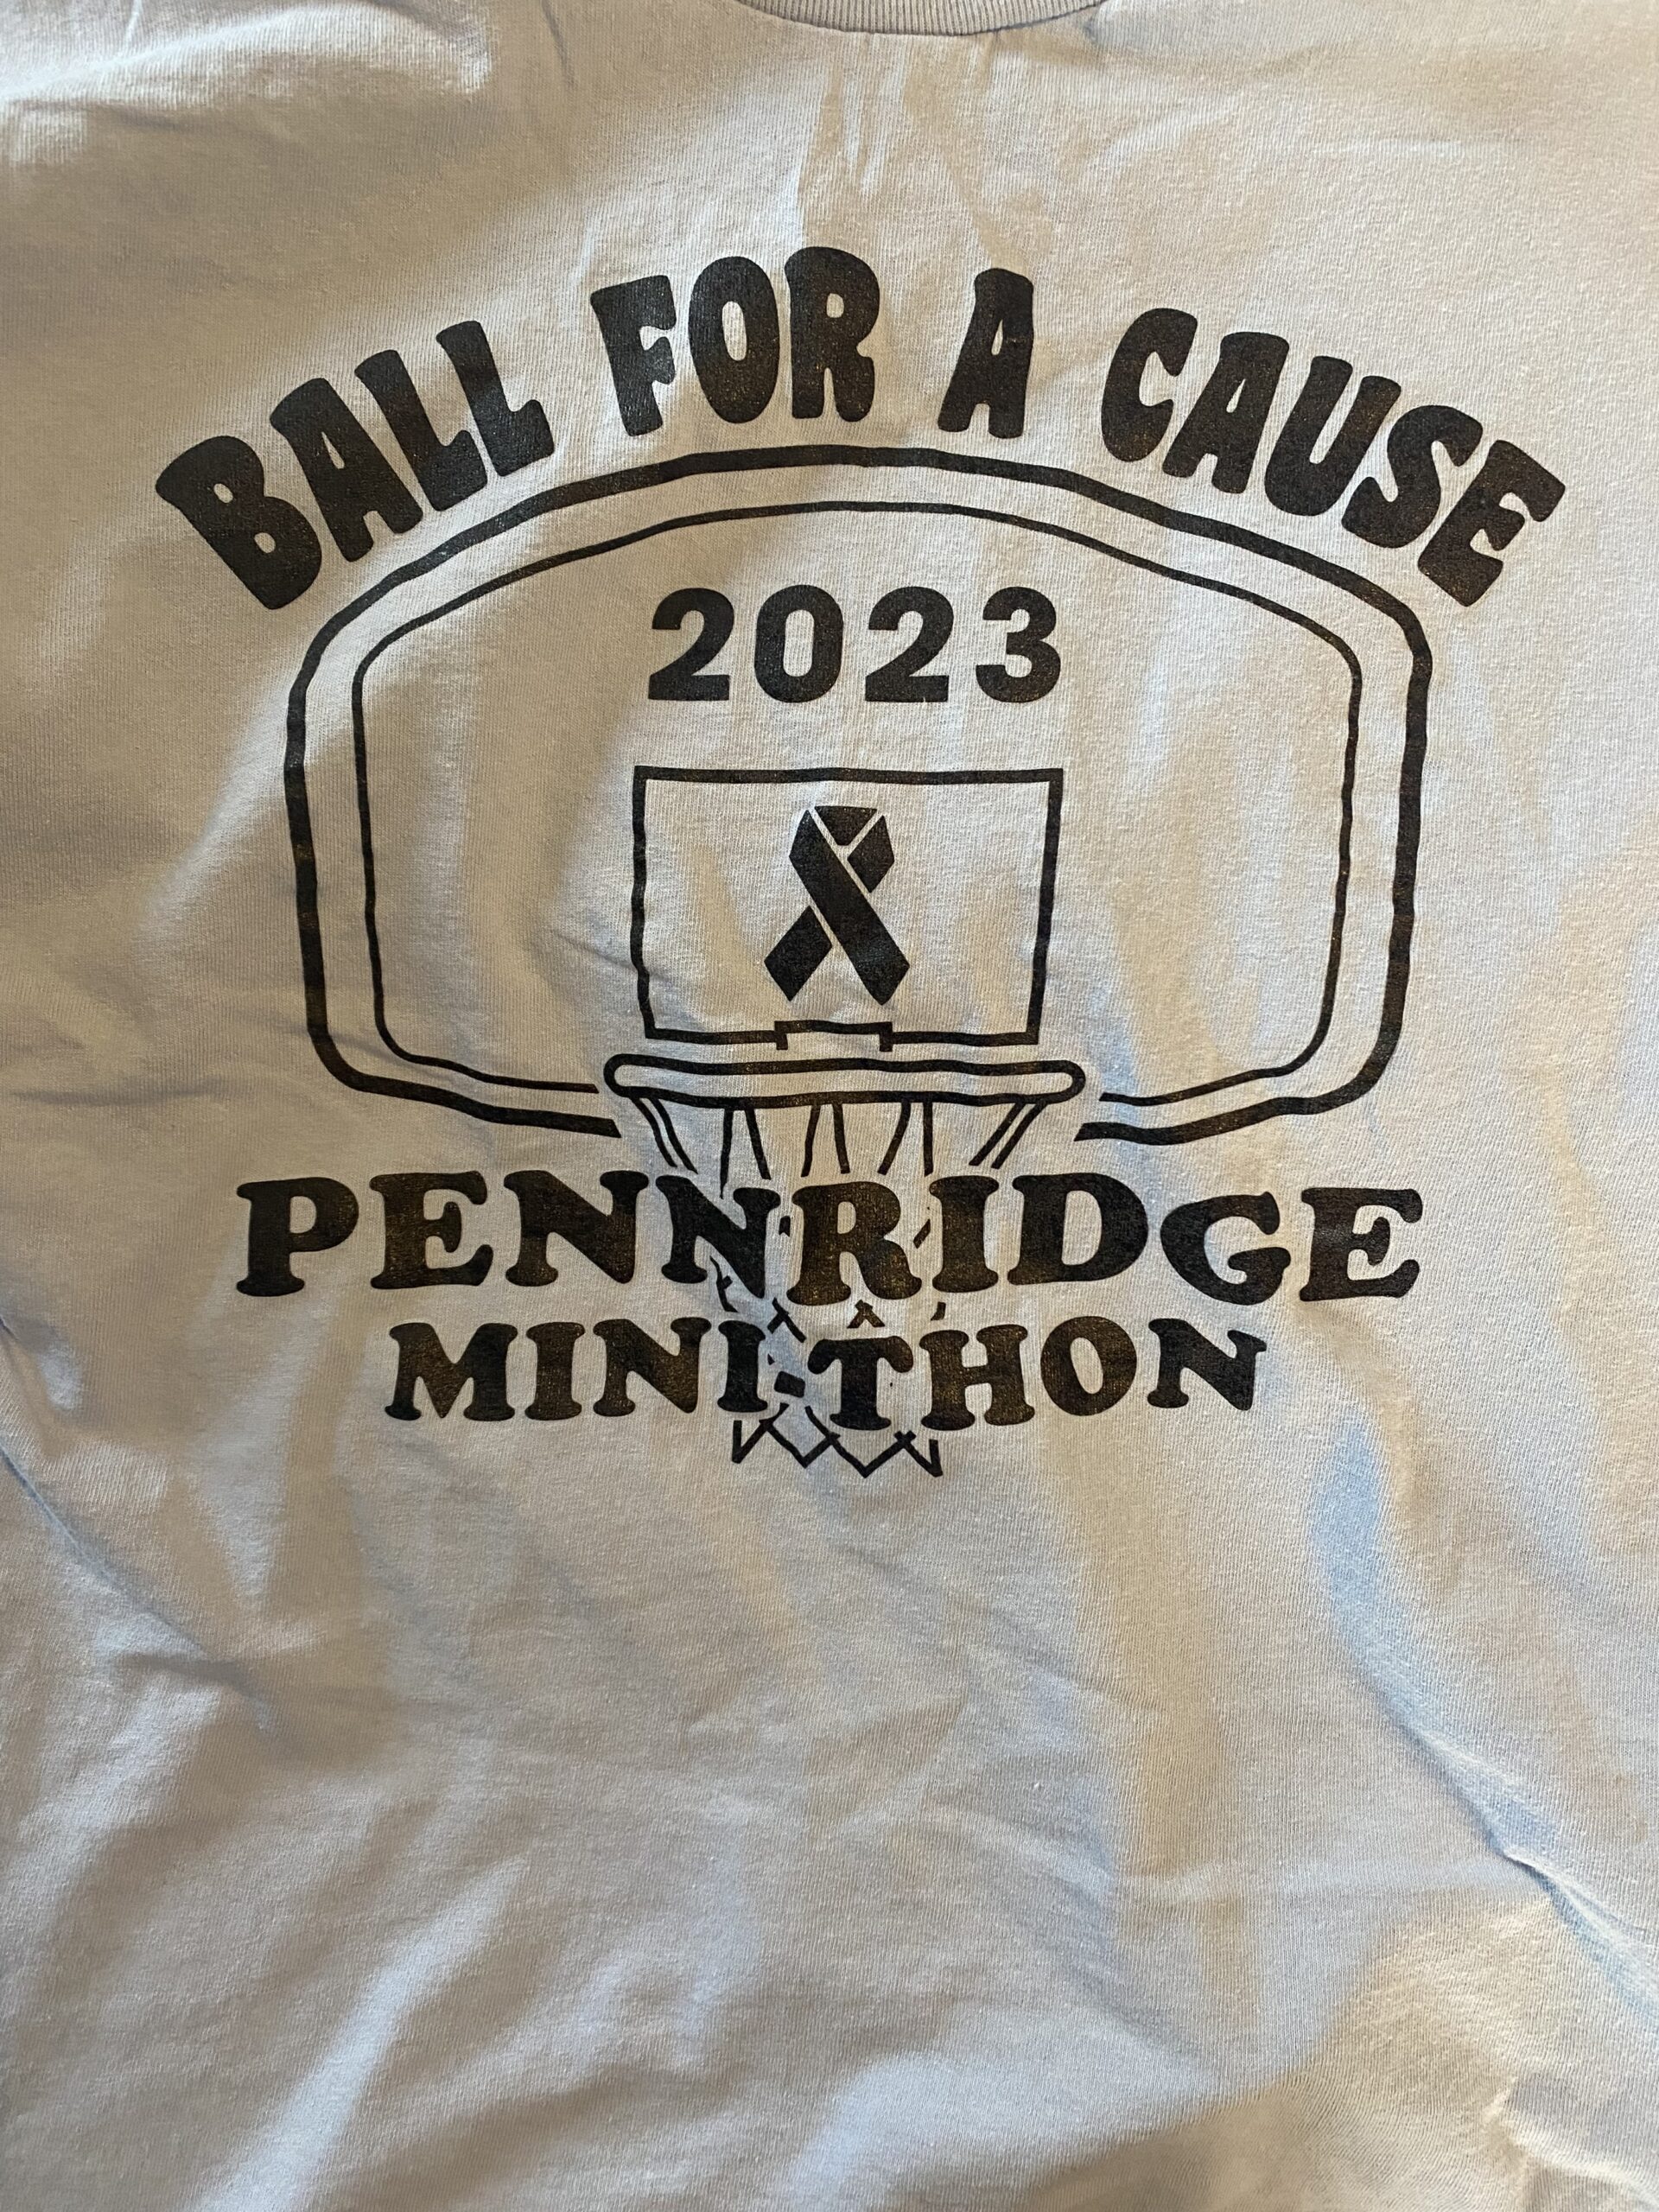 The T-shirt logo for Pennridge Mini- THONs ball for a cause event which helped raise money towards the $28,000 total